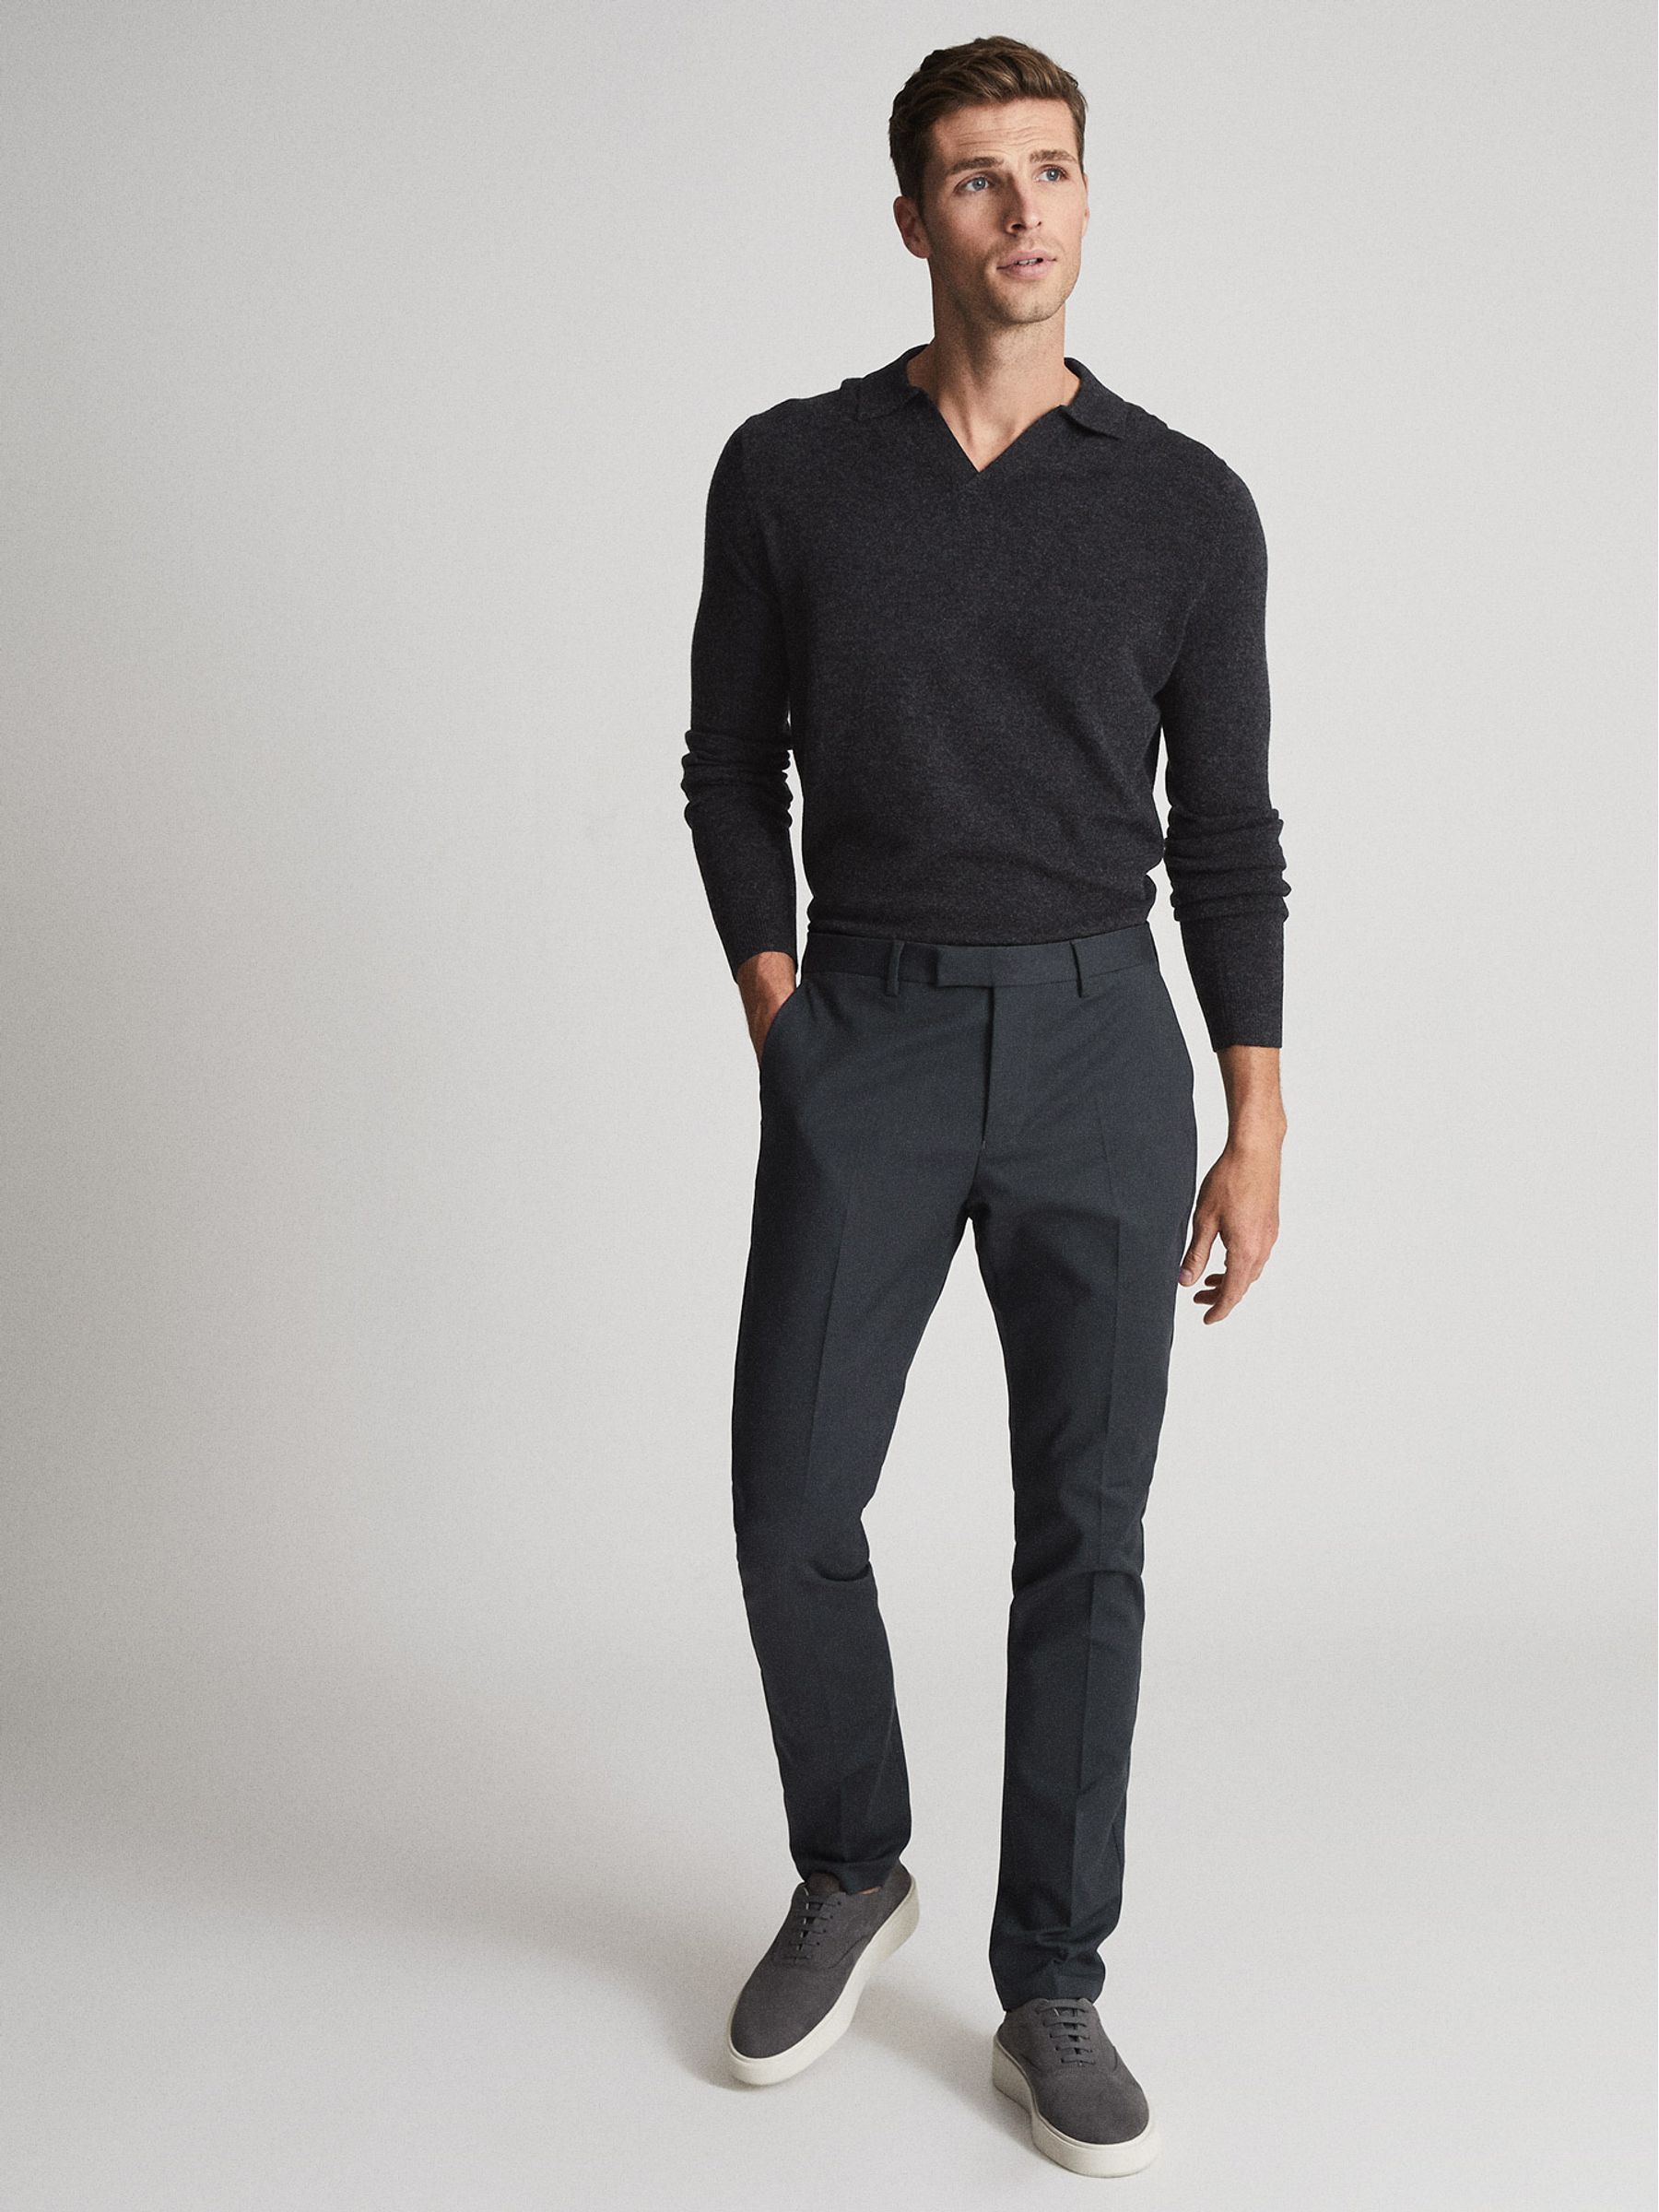 Cashmere Blend Open Collar Polo Shirt in Charcoal Melange - REISS